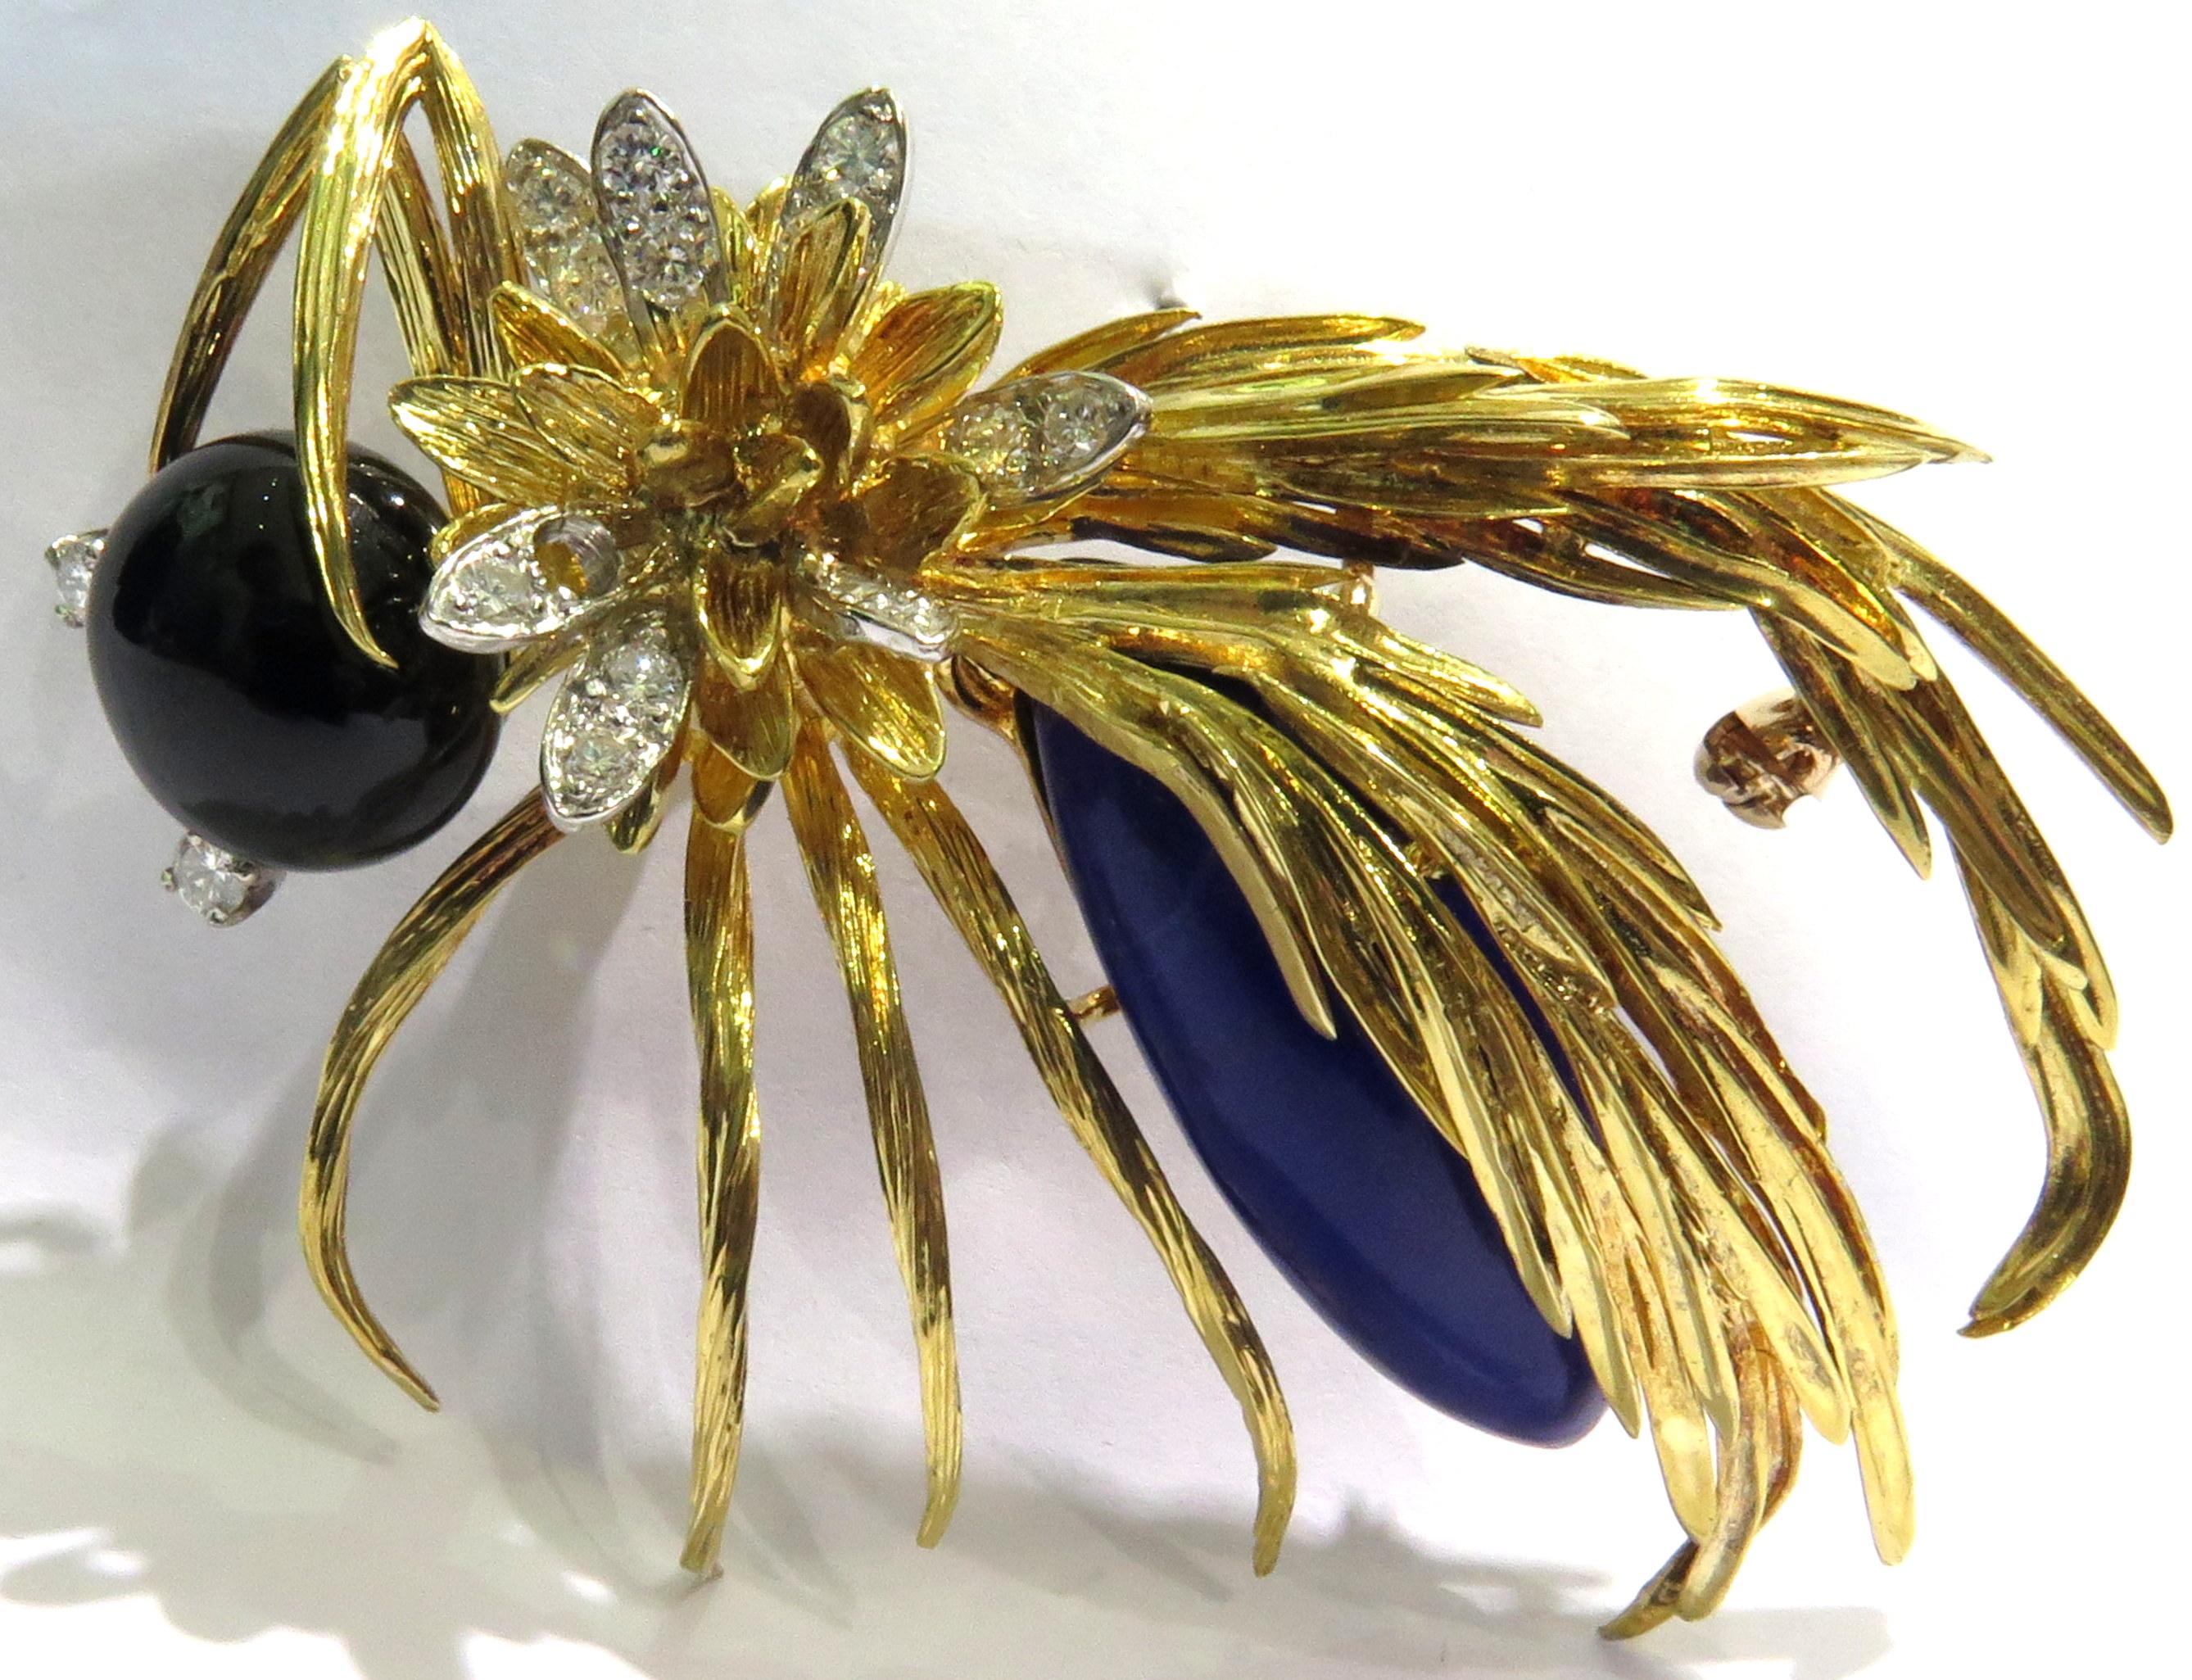 Huge Hammerman Brothers Platinum Gold Wasp Pin Brooch With Diamonds Lapis & Onyx For Sale 7